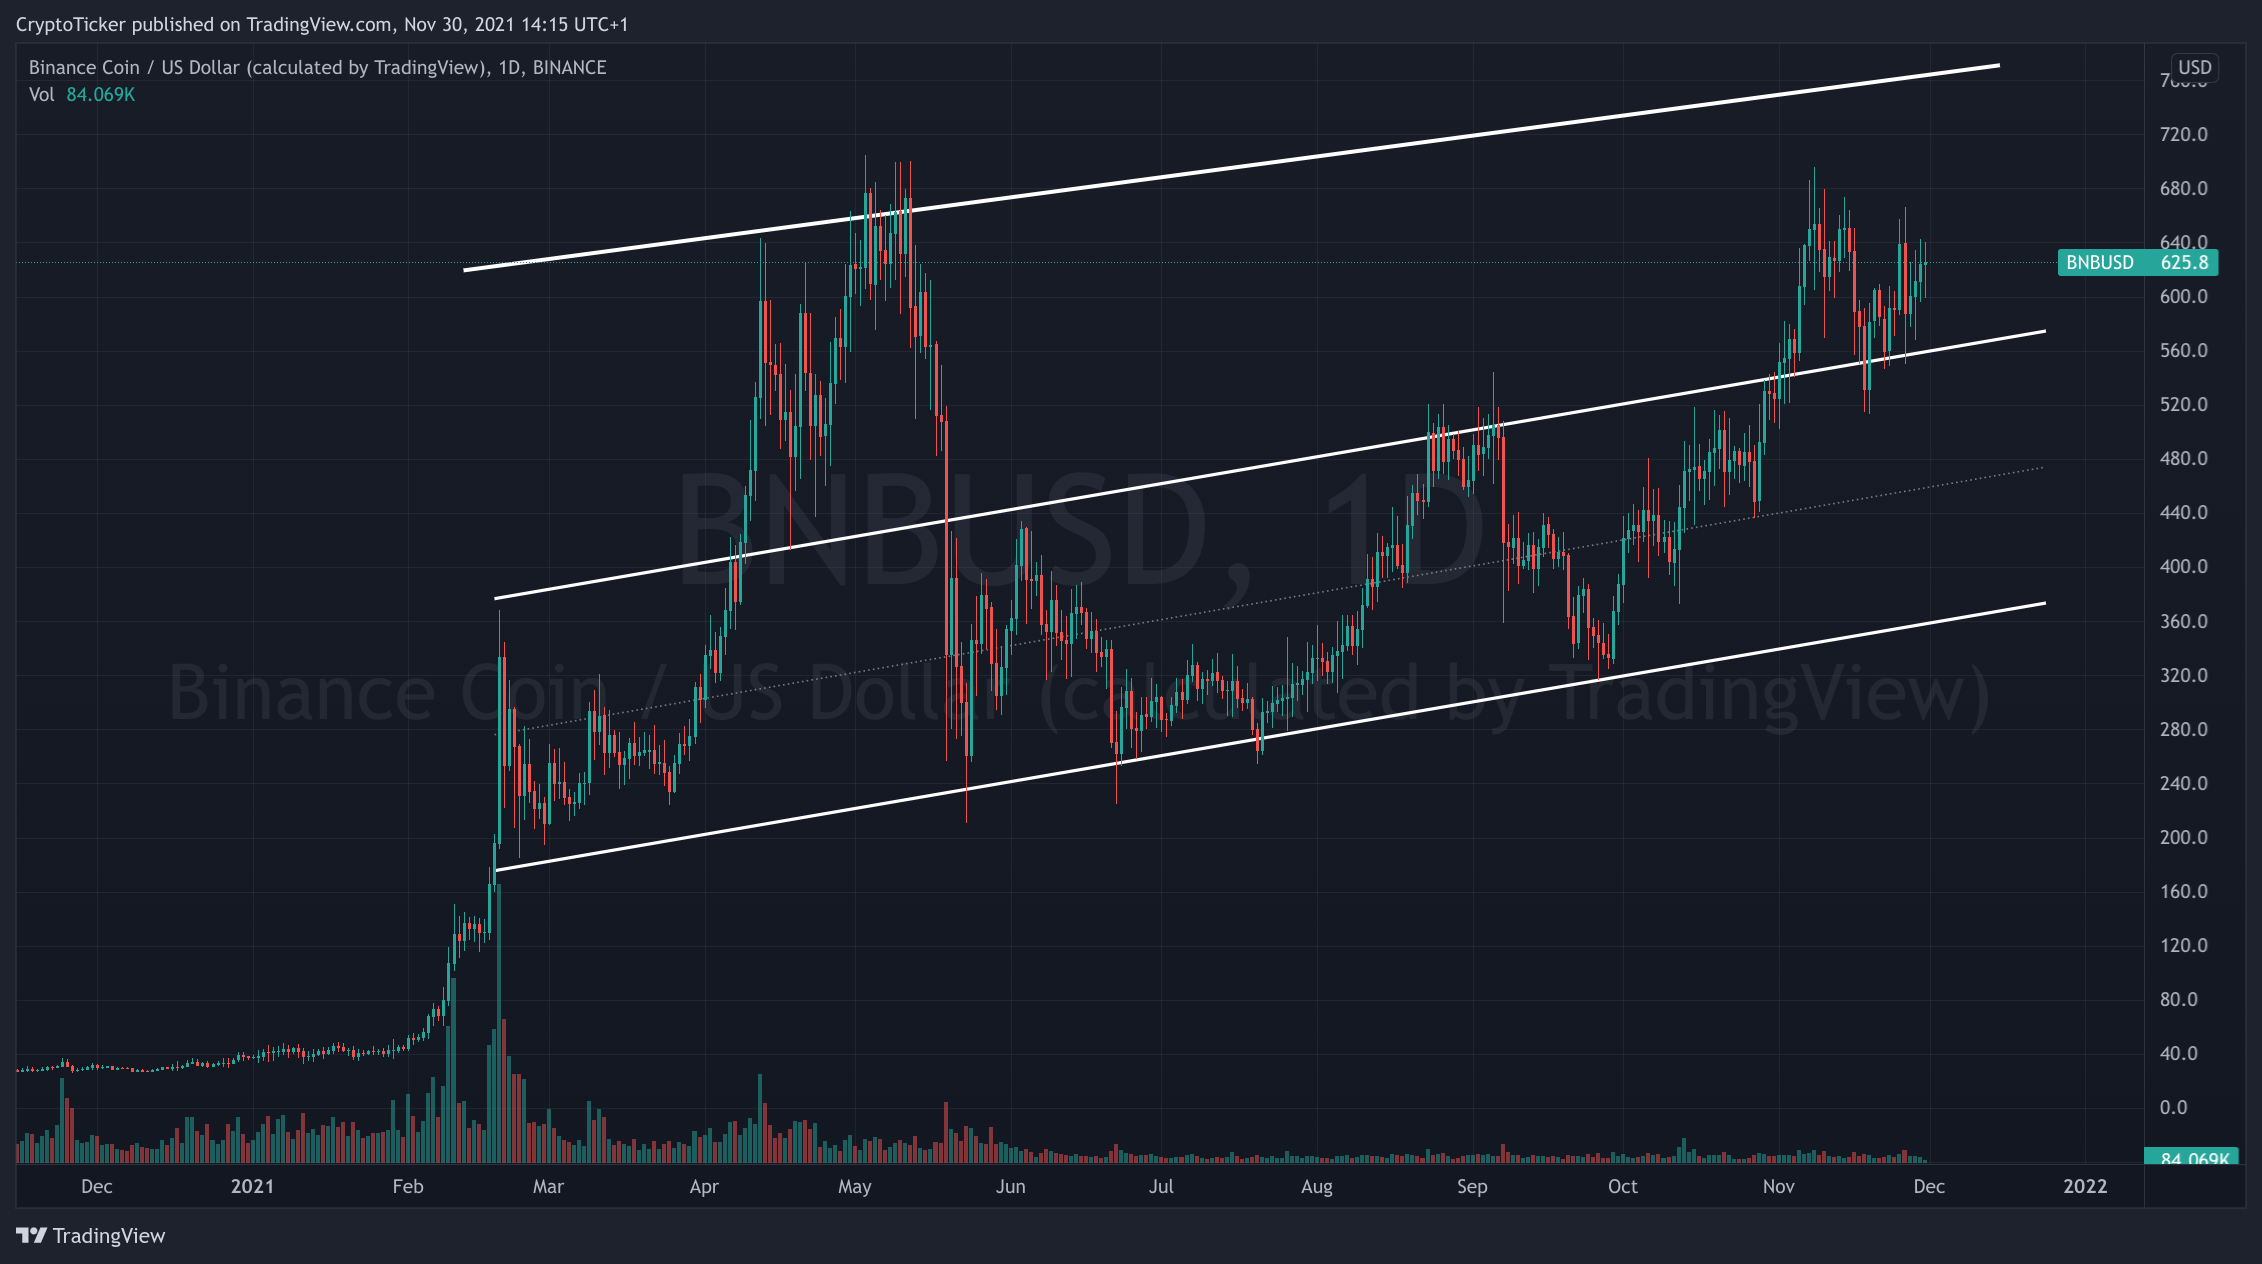 BNB BOOM - BNB/USD 1-day chart showing BNB's uptrend in 2021